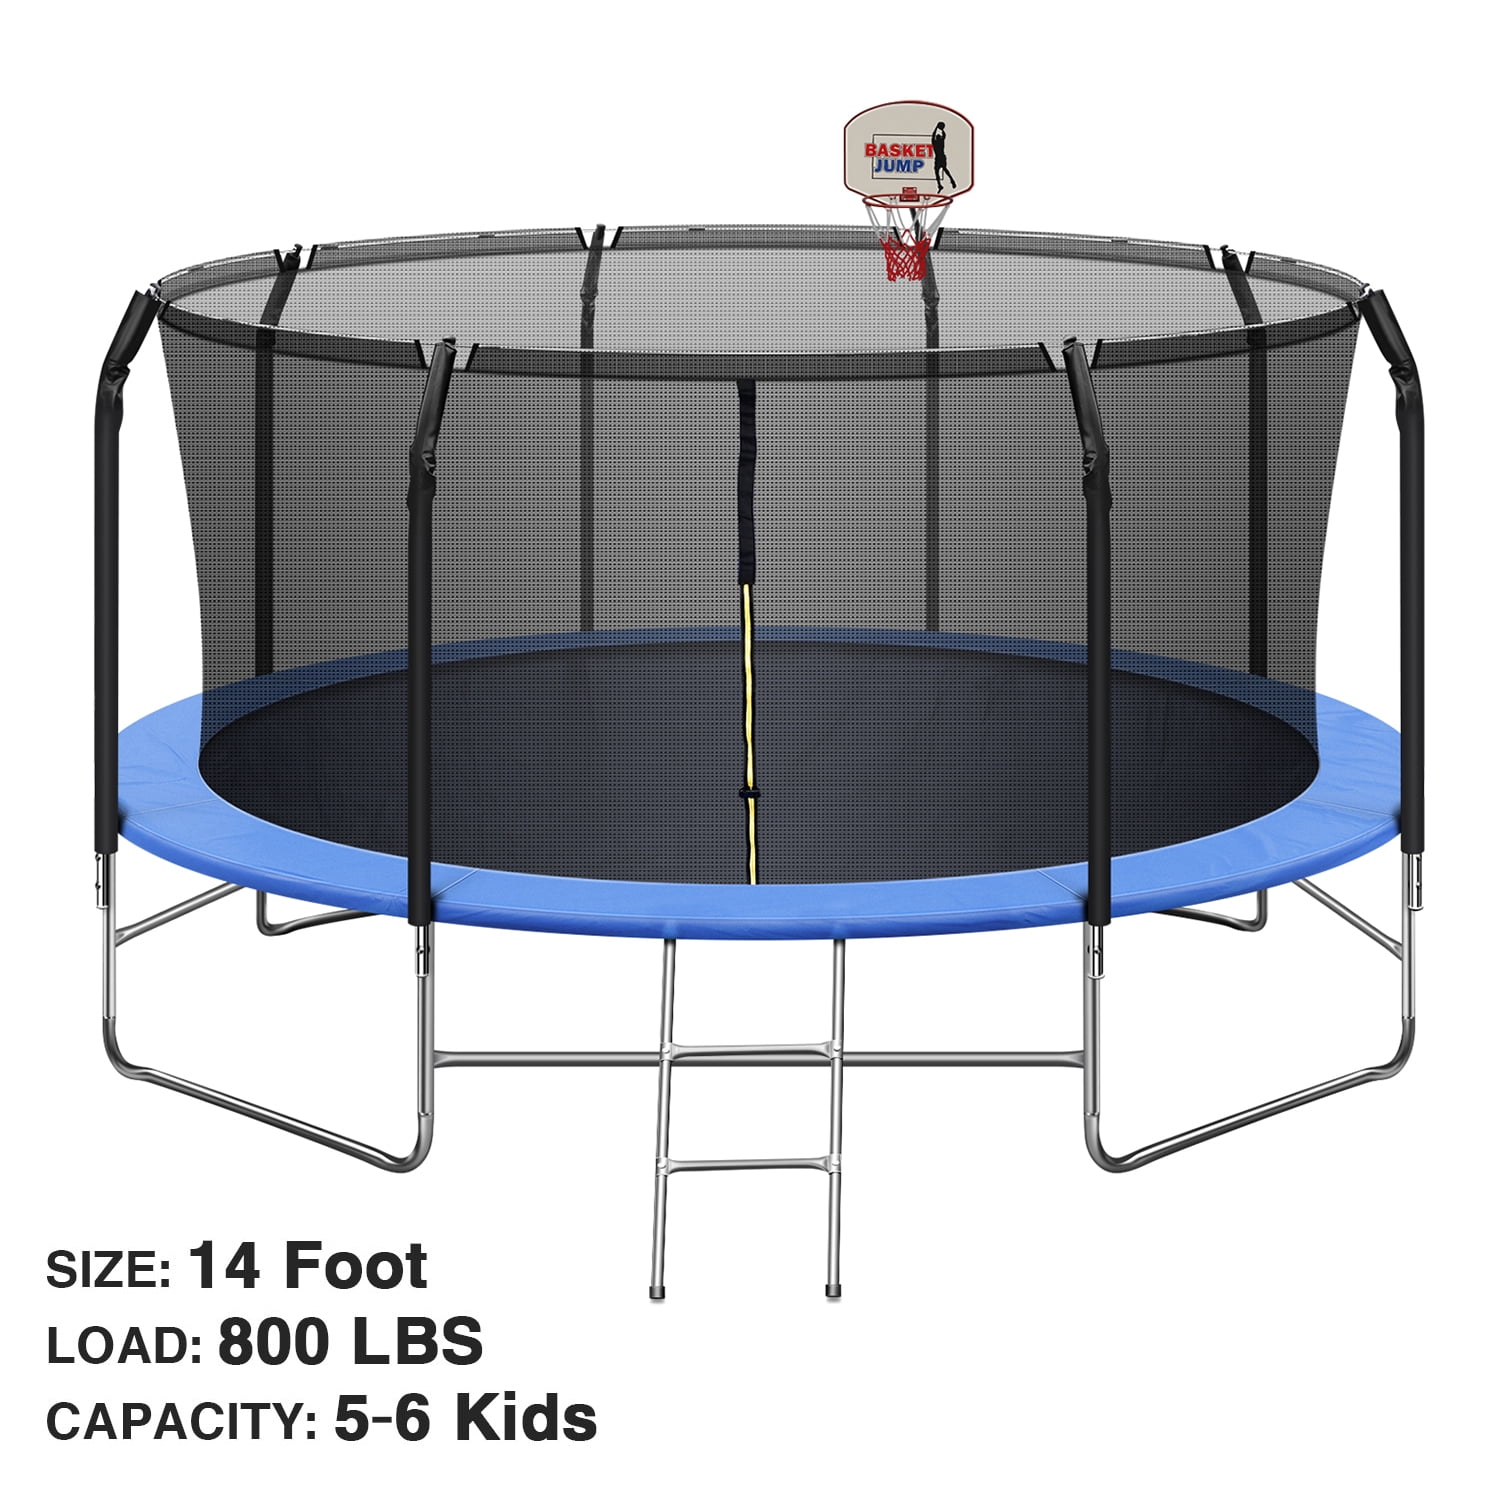 14FT with Hoop&Safety Enclosure Net, Capacity 5-6 Kids, Waterproof and Ladder, Outdoor Backyard Trampolines, Basketball Trampoline for Kids/Adults - Walmart.com